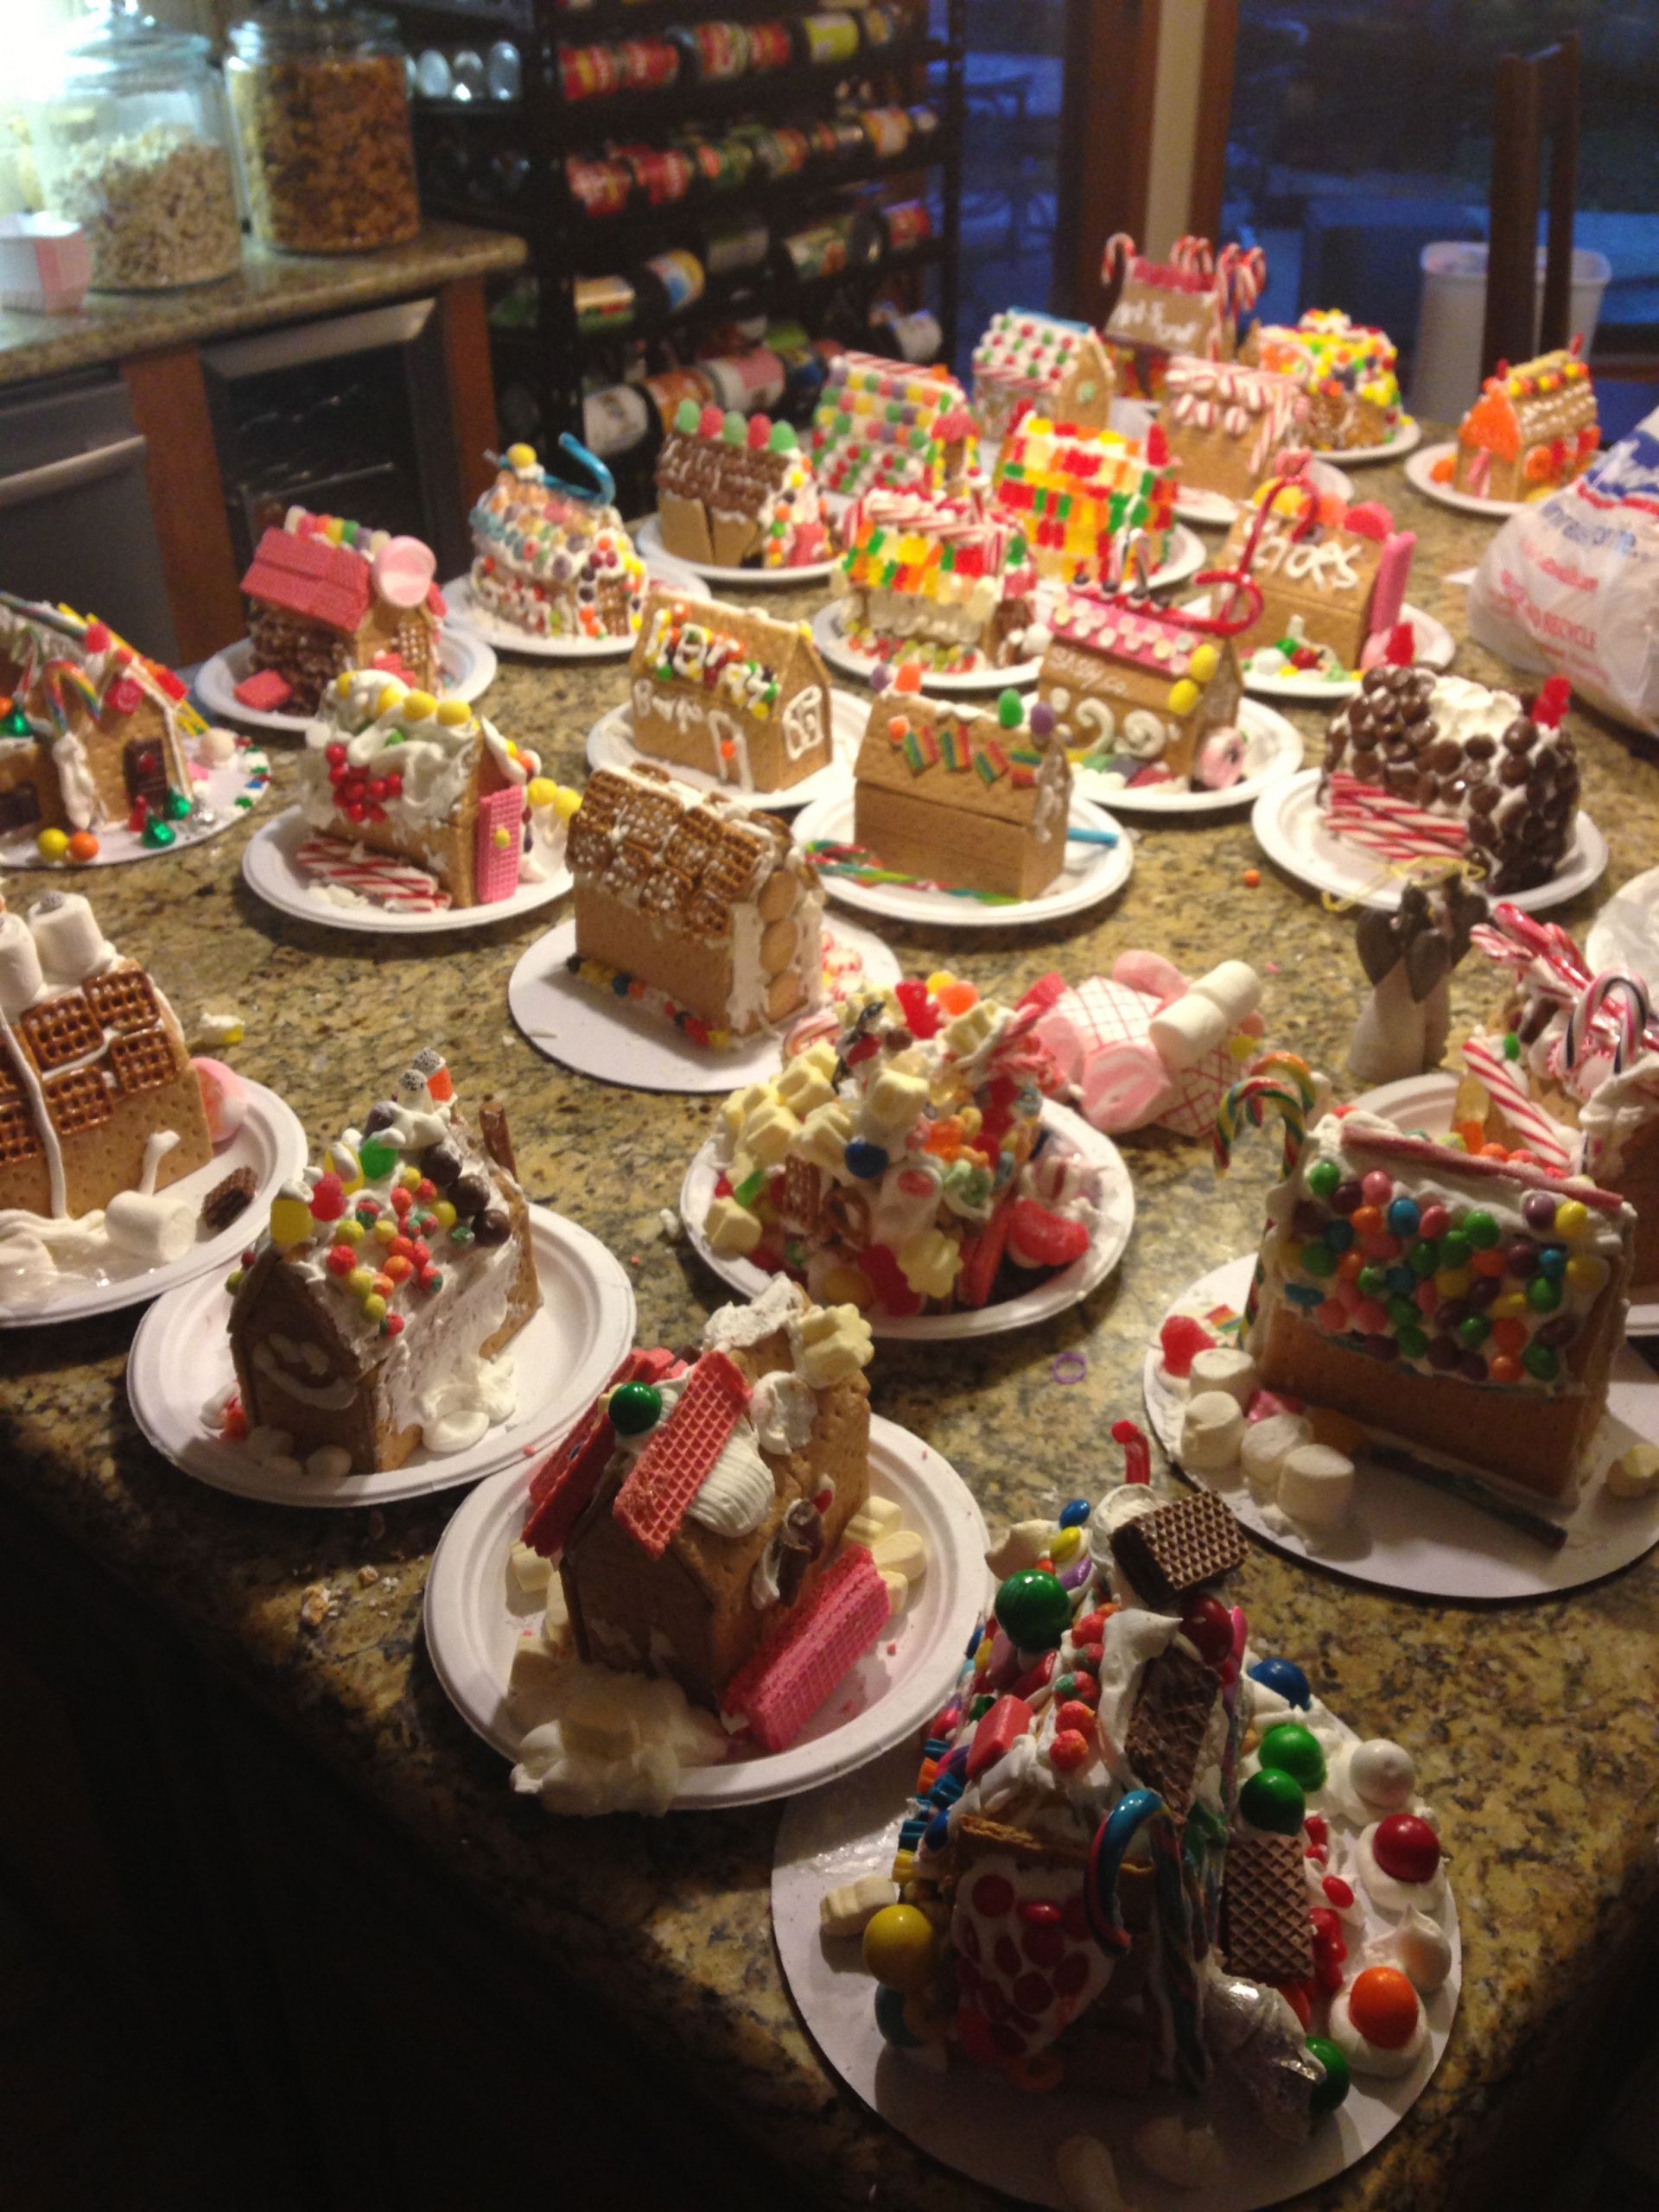 House Christmas Party Ideas
 How To Host a GingerBread House Party Eat This Up